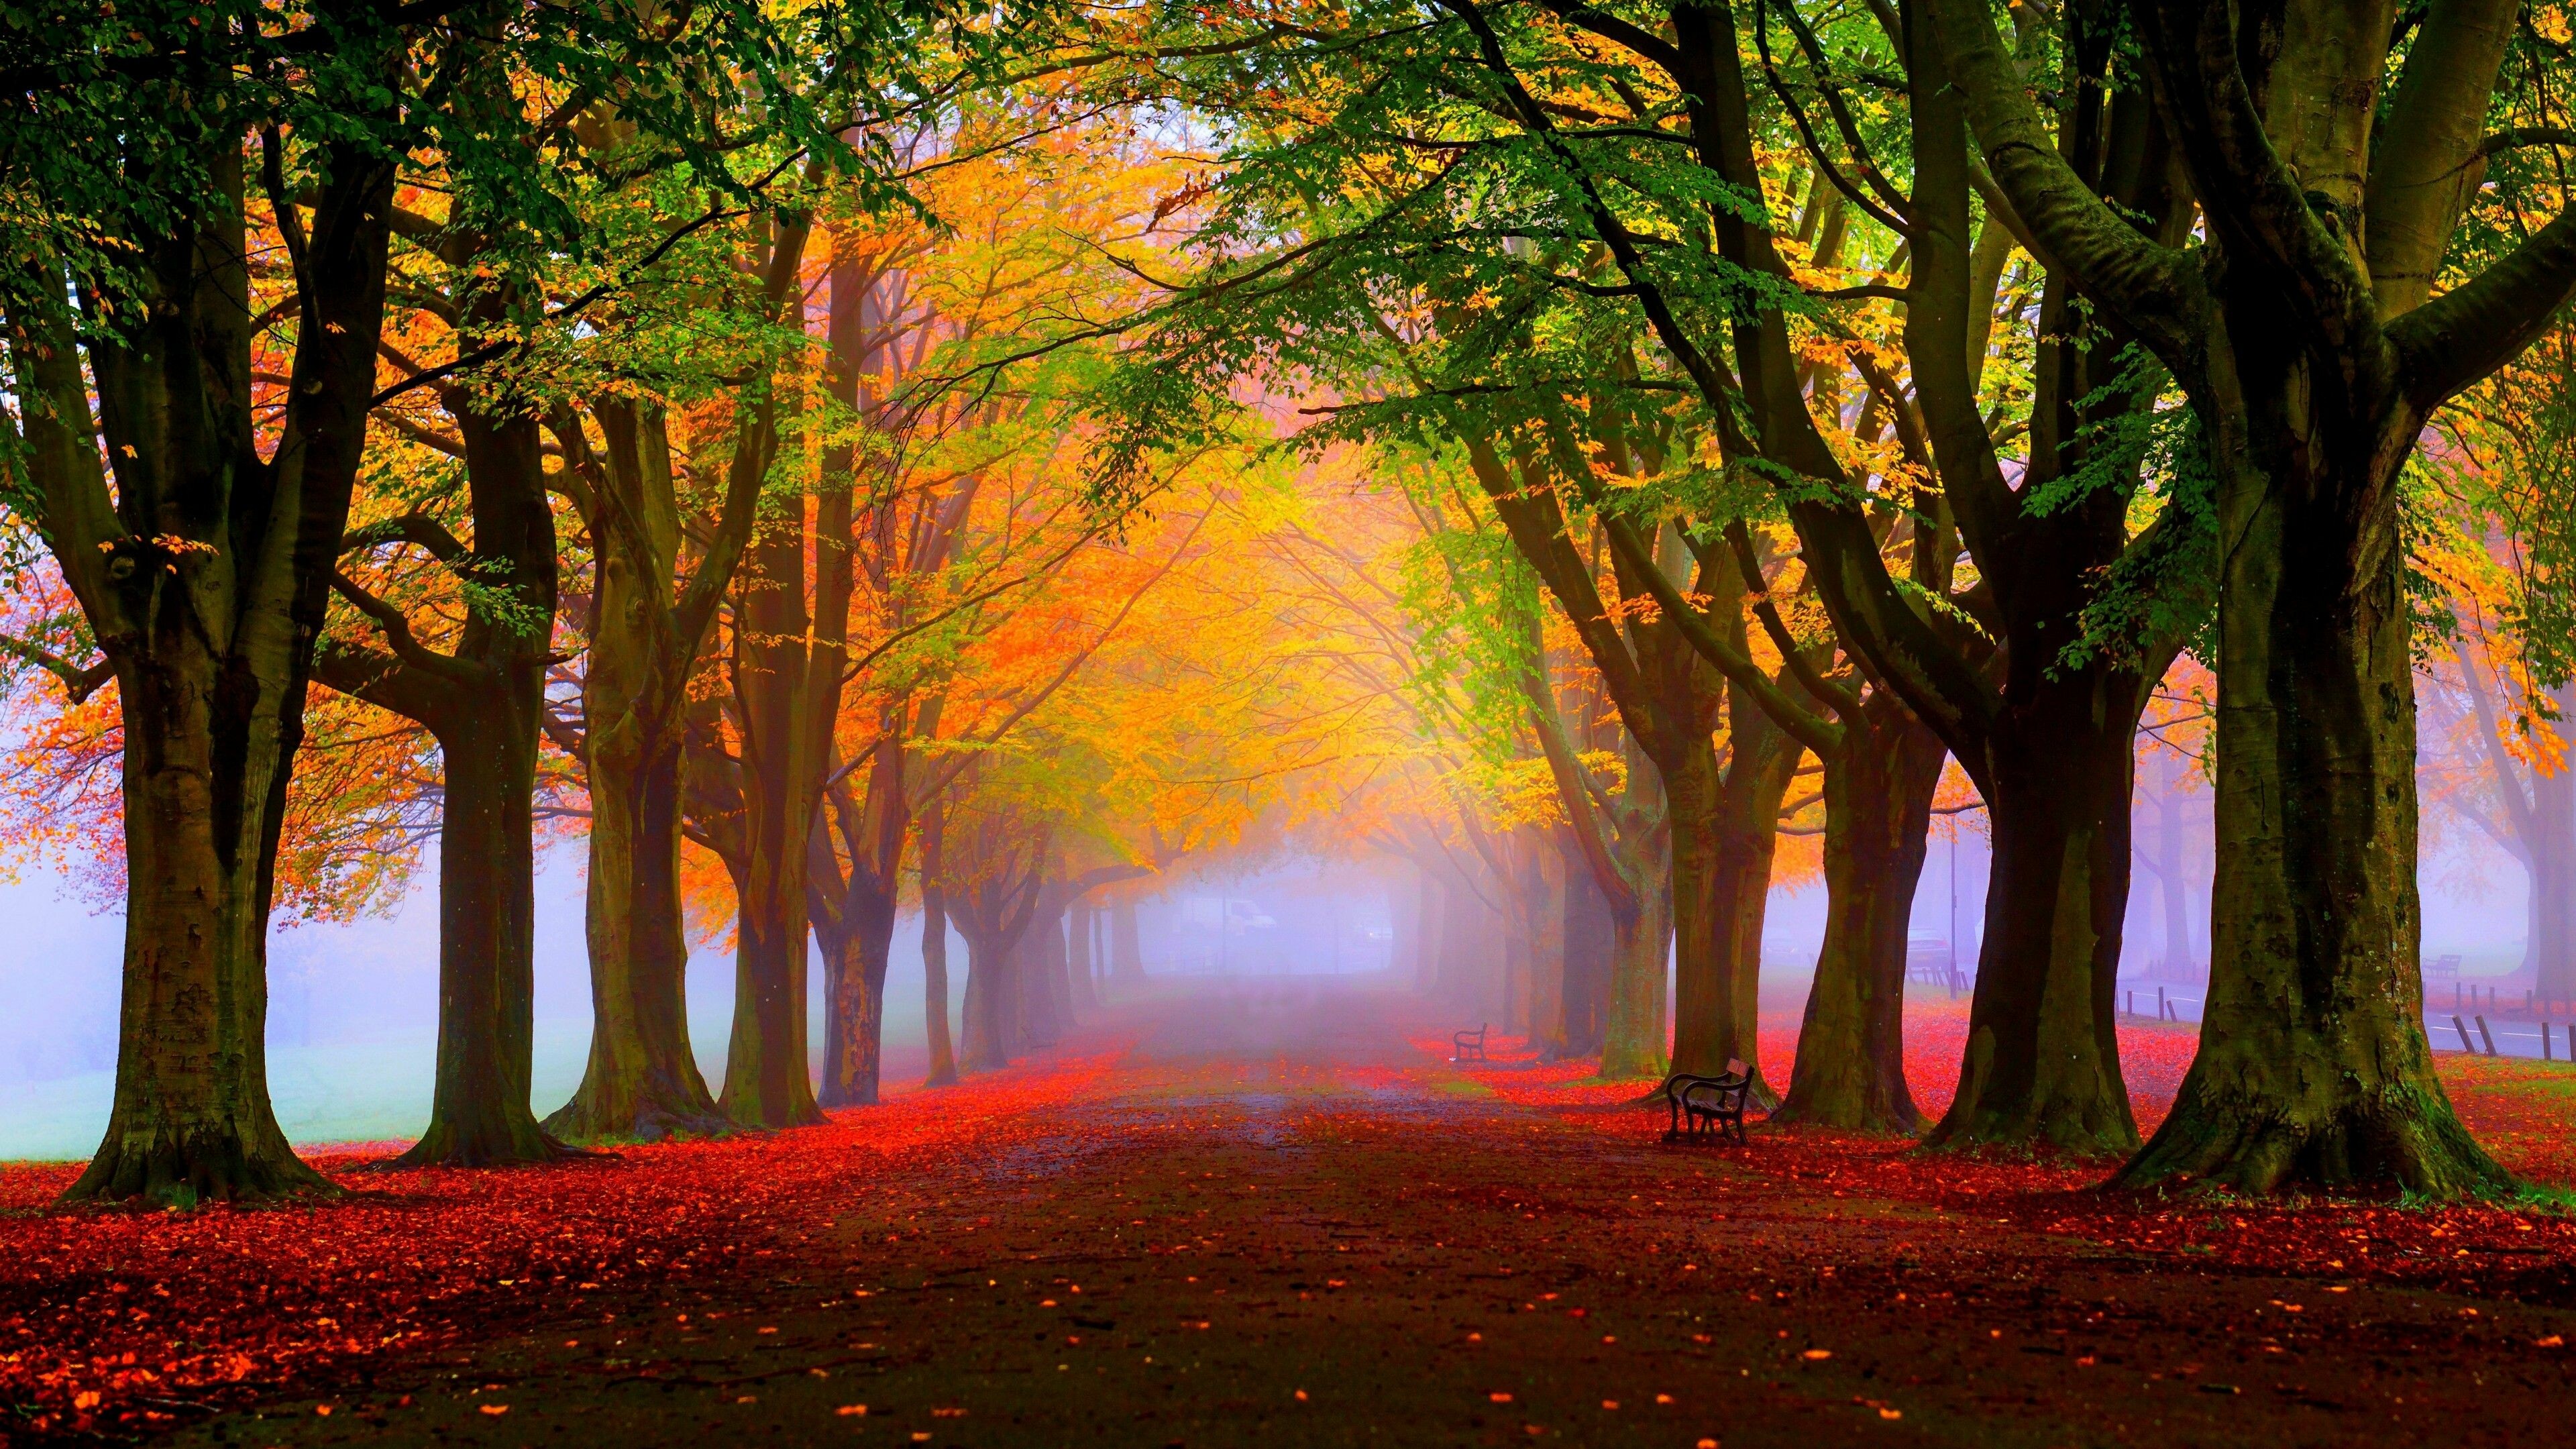 Autumn: Fall, The season of the year between summer and winter. 3840x2160 4K Background.